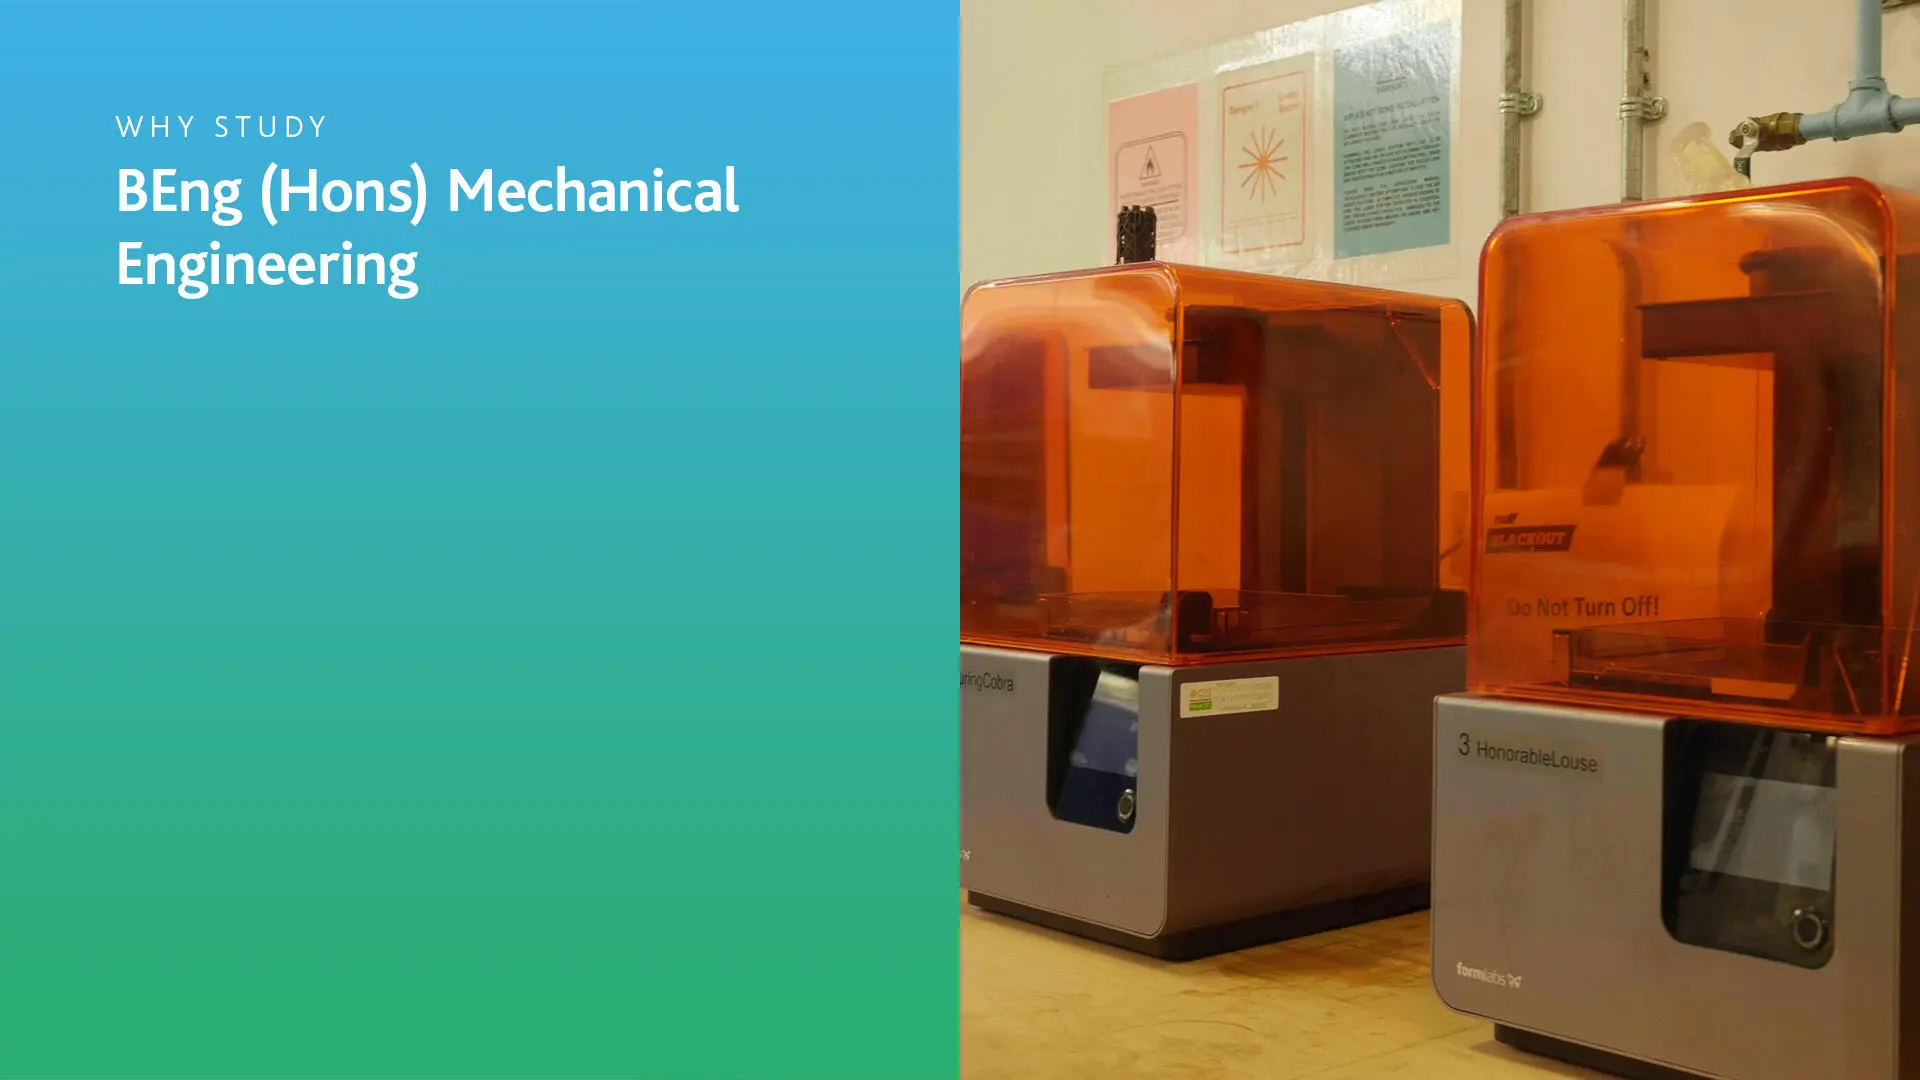 On the left of the screen is a blue to green gradient (portrait) with white copy over the top which reads 'Why study BEng (Hons) Mechanical Engineering'. To the right is a photo of 3D printers.